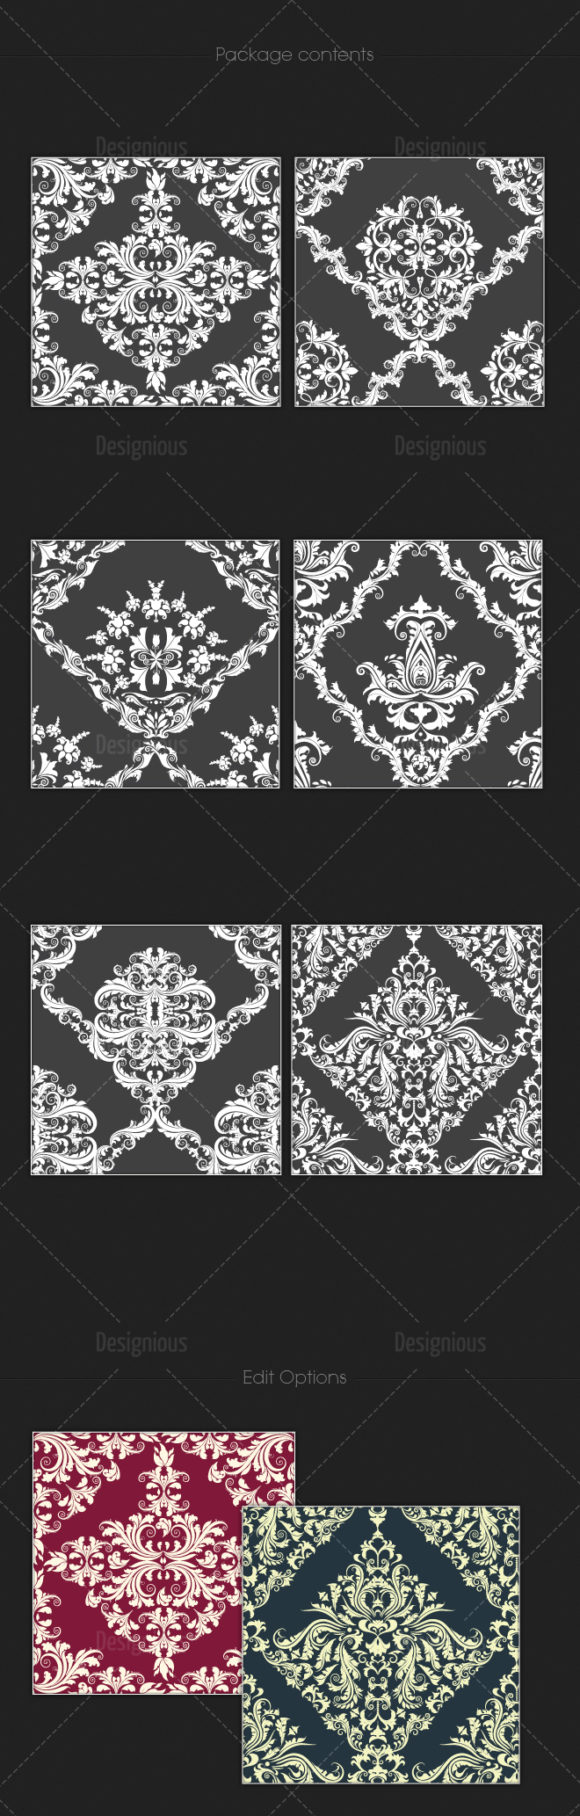 Seamless Patterns Vector Pack 102 2